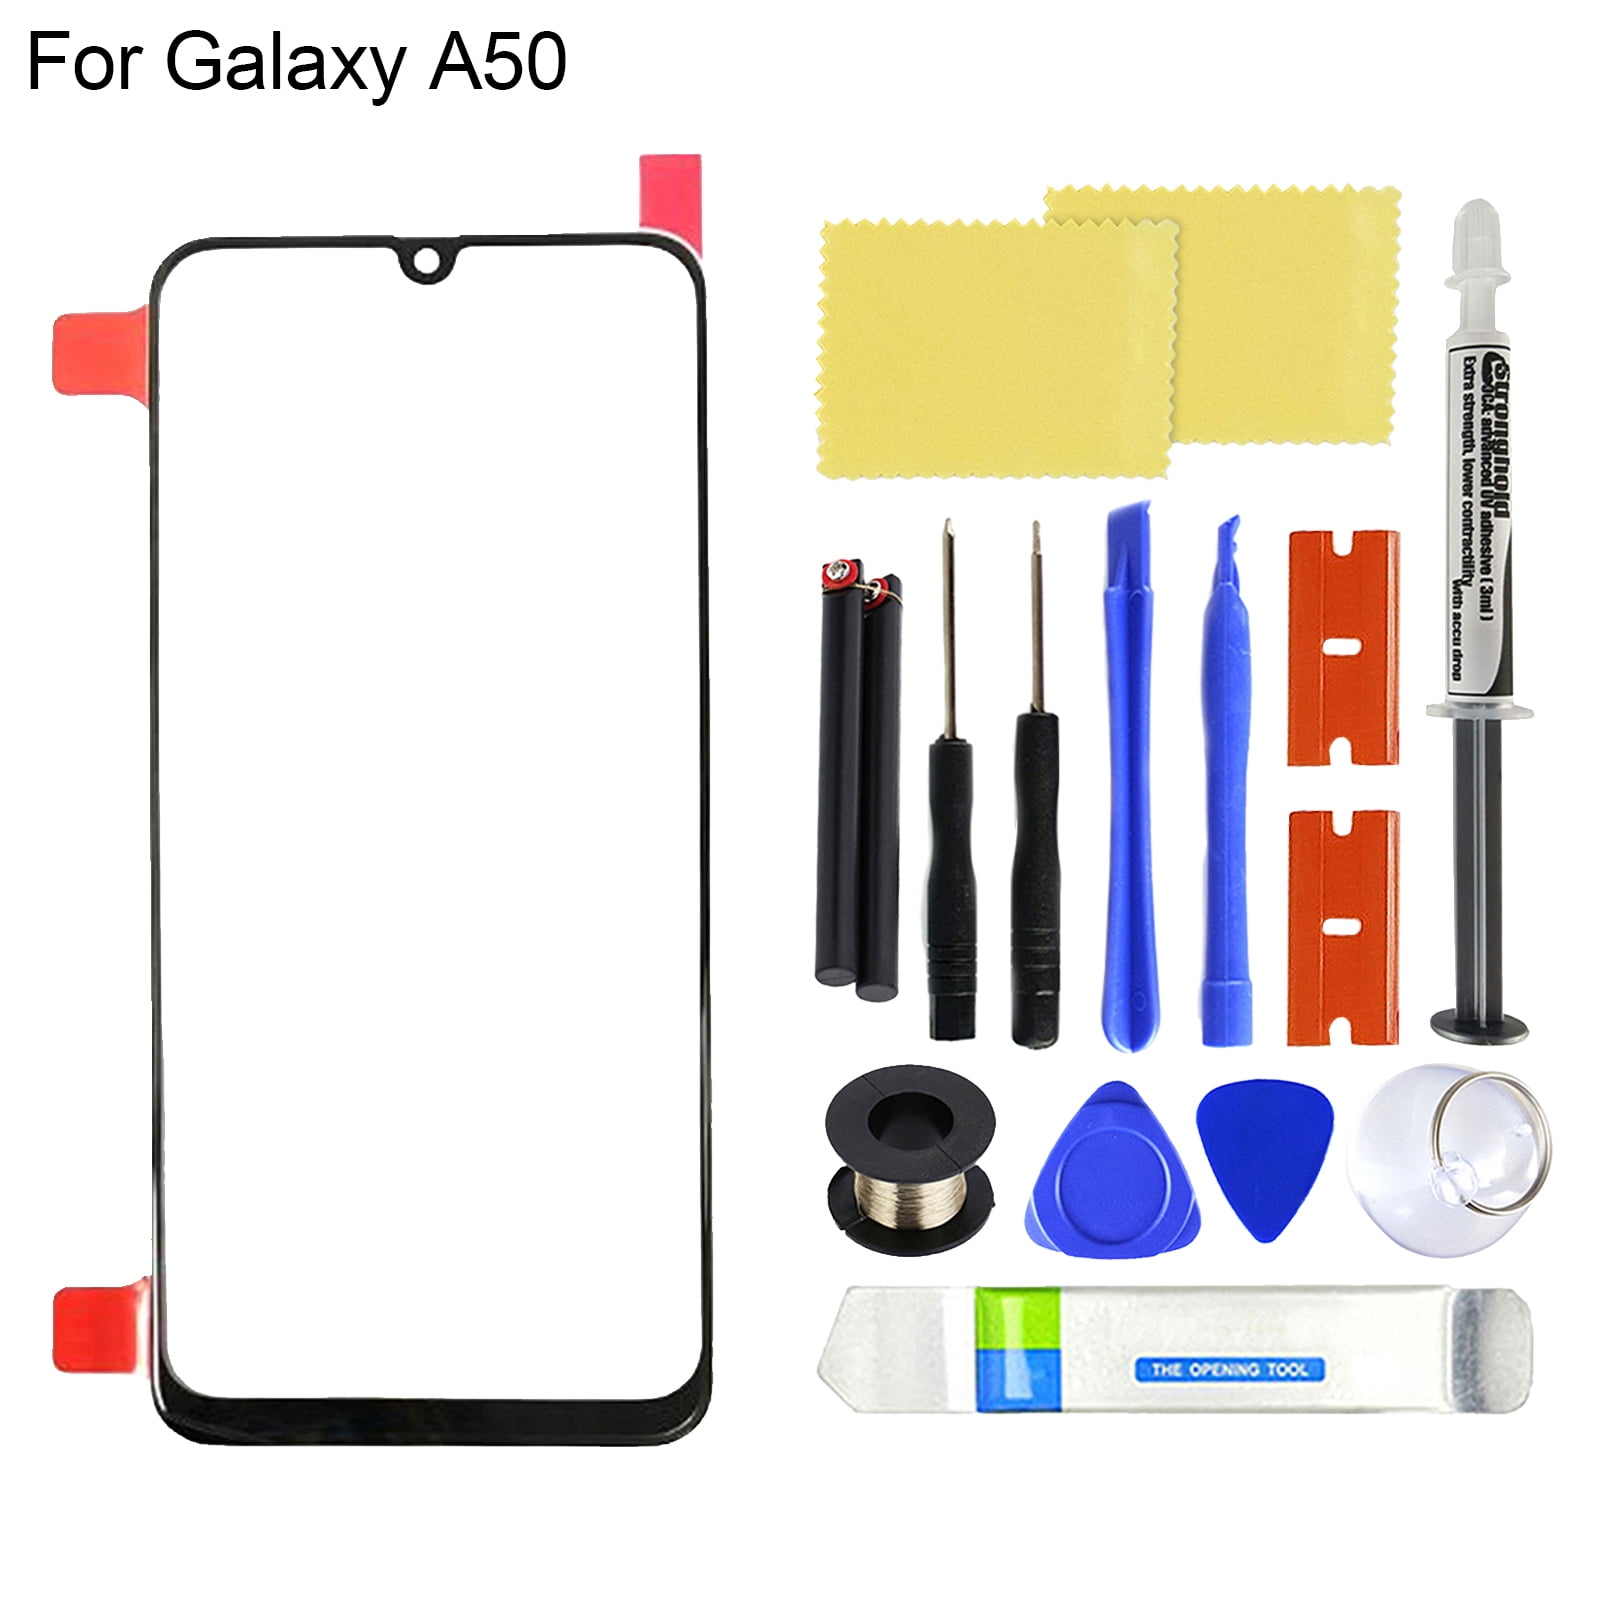 Cracked Shattered Phone for Samsung Galaxy A40 with Screen Repair Kit for Replace Your Damaged for Galaxy A10/A20/A30/A40/A50/A60/A70/A80/A90 Screen Replacement